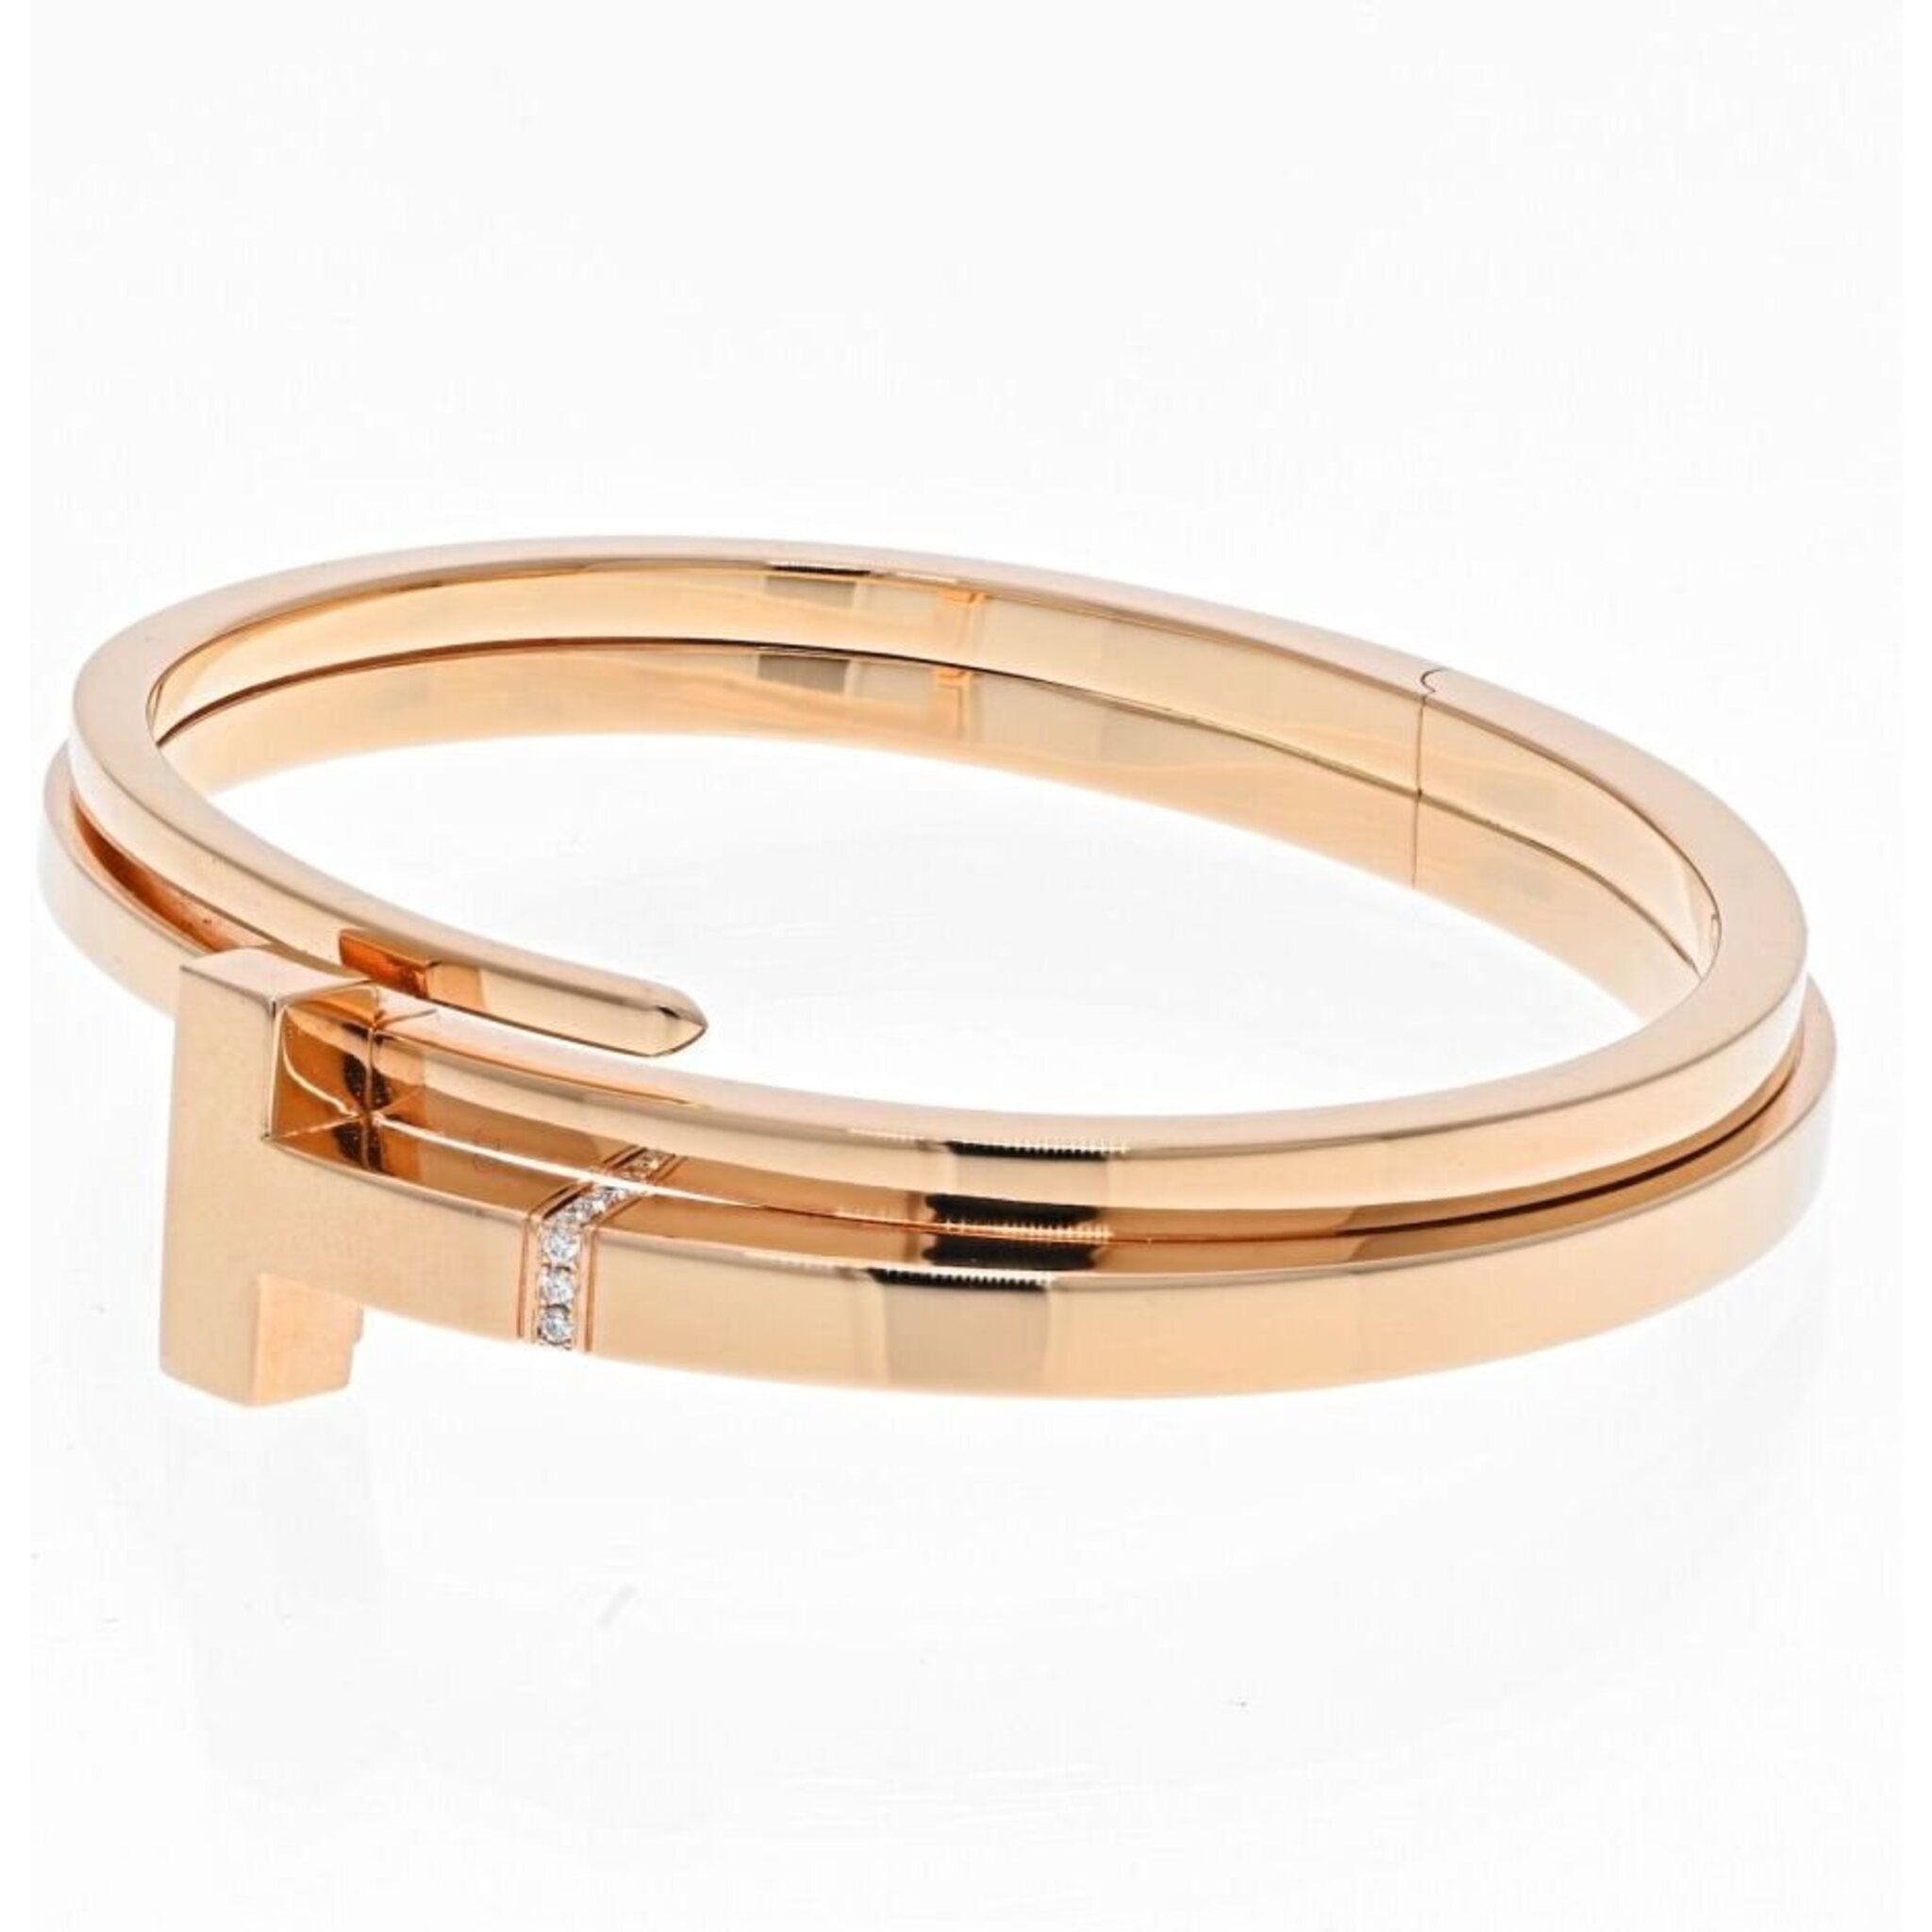 Tiffany T Wire Bracelet in Rose Gold with Black Onyx and Diamonds | Tiffany  & Co.